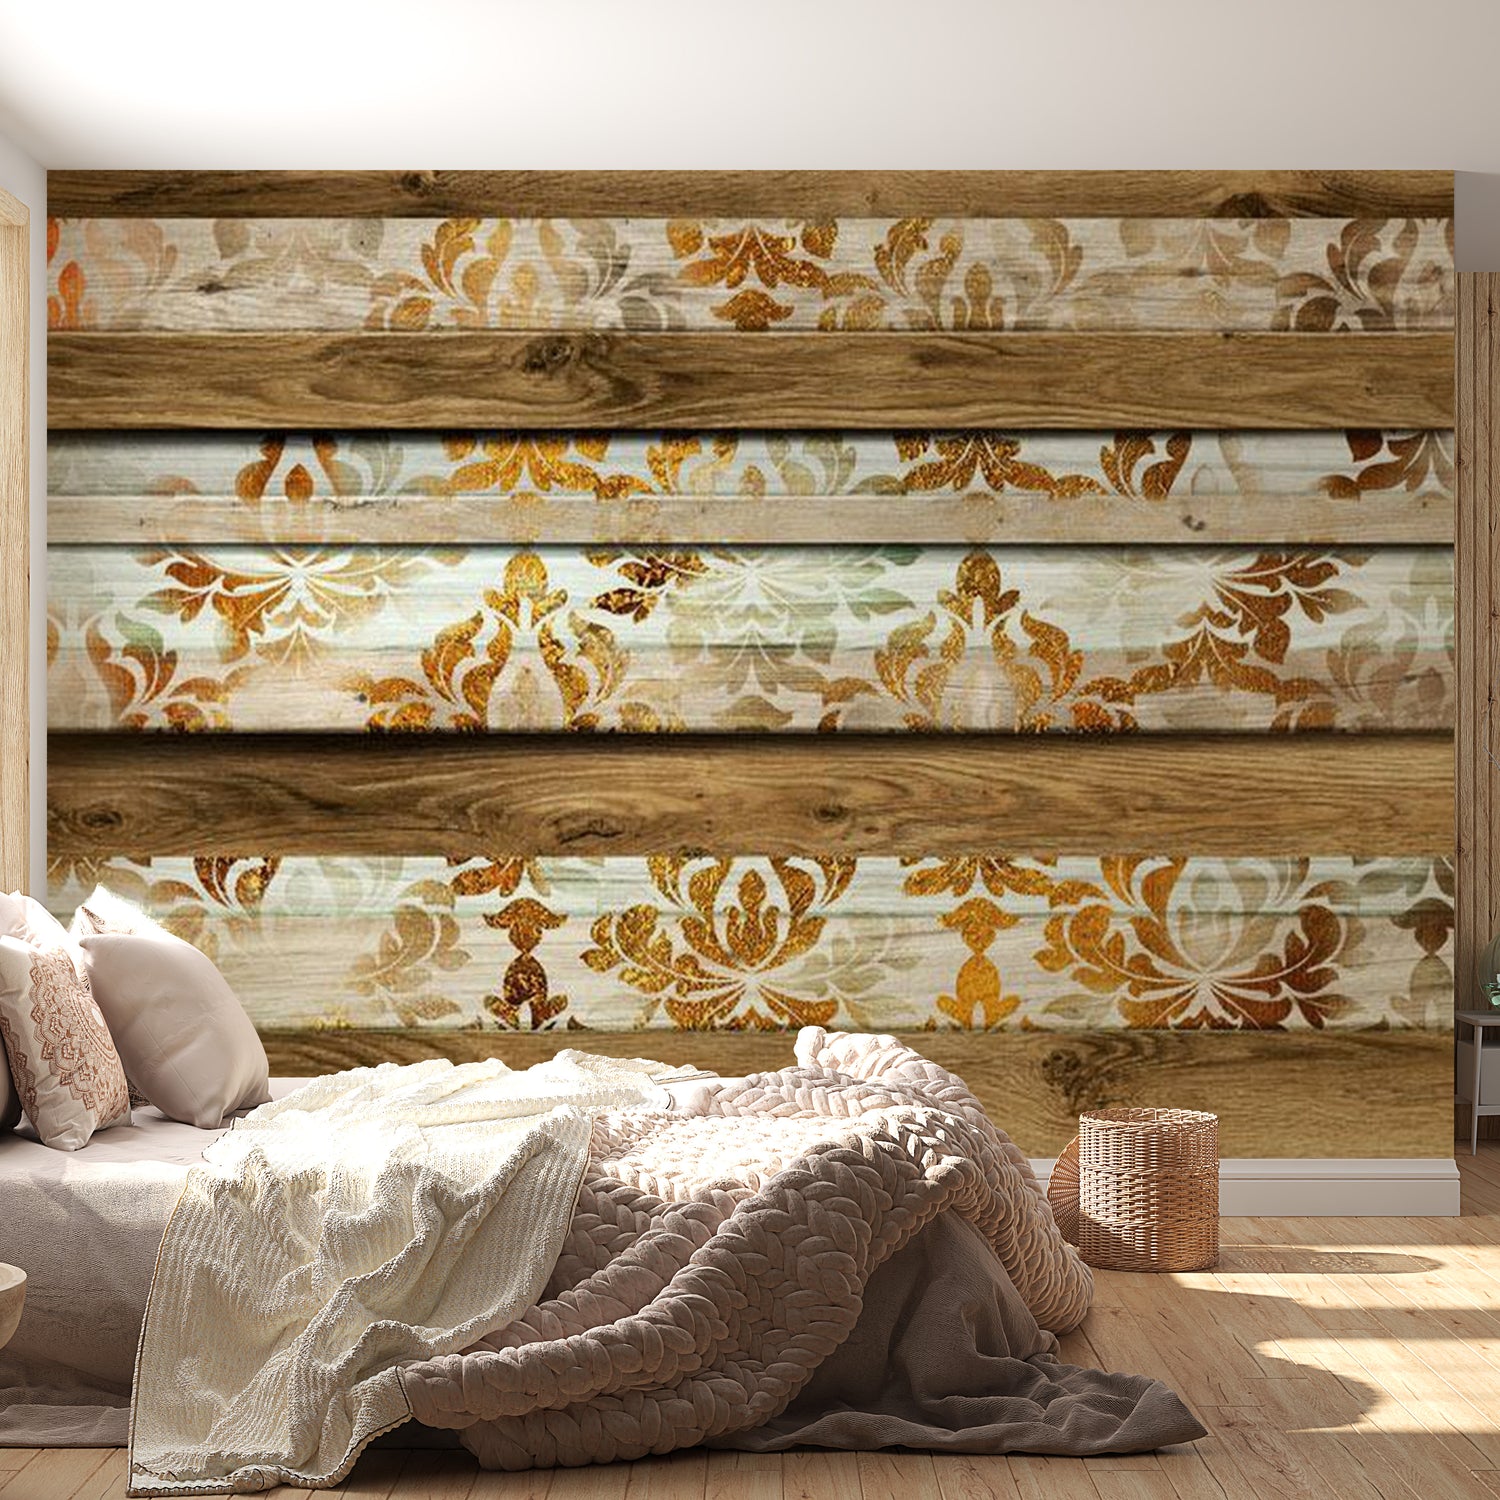 Peel & Stick XXL Wall Mural - Baroque on Wood - Removable Wall Decals